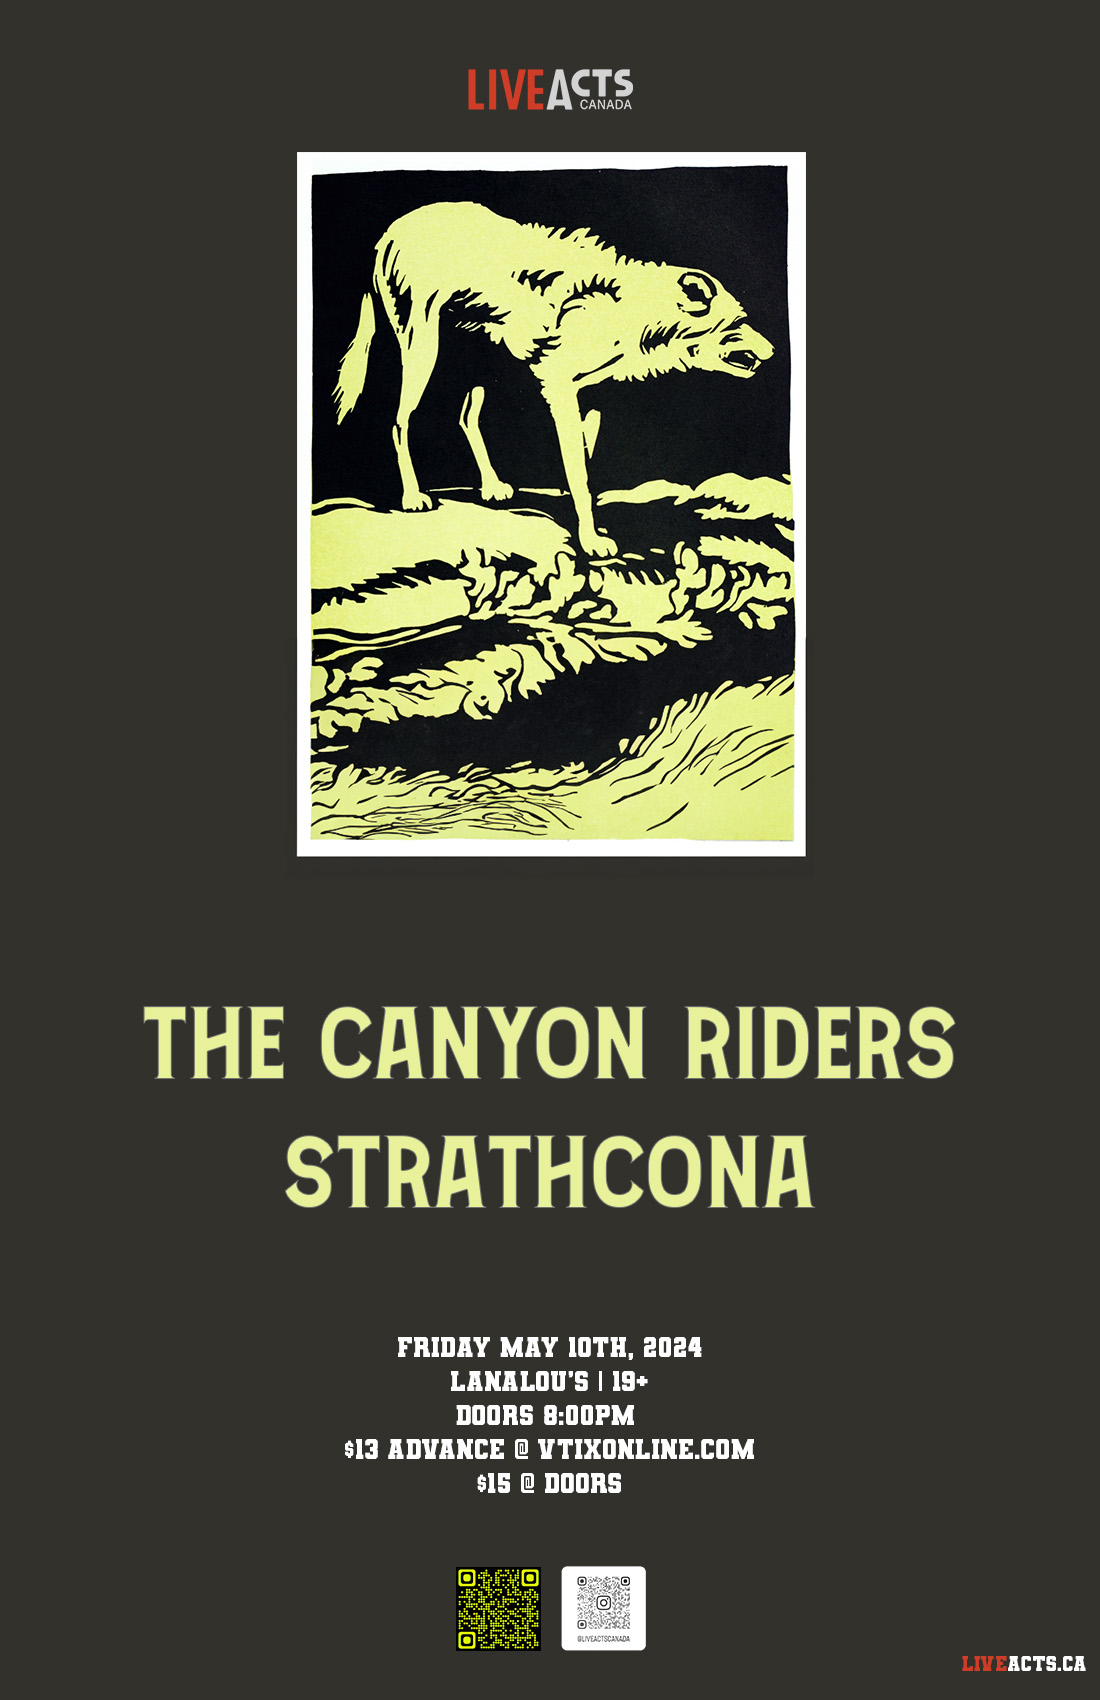 The Canyon Riders w/ Strathcona